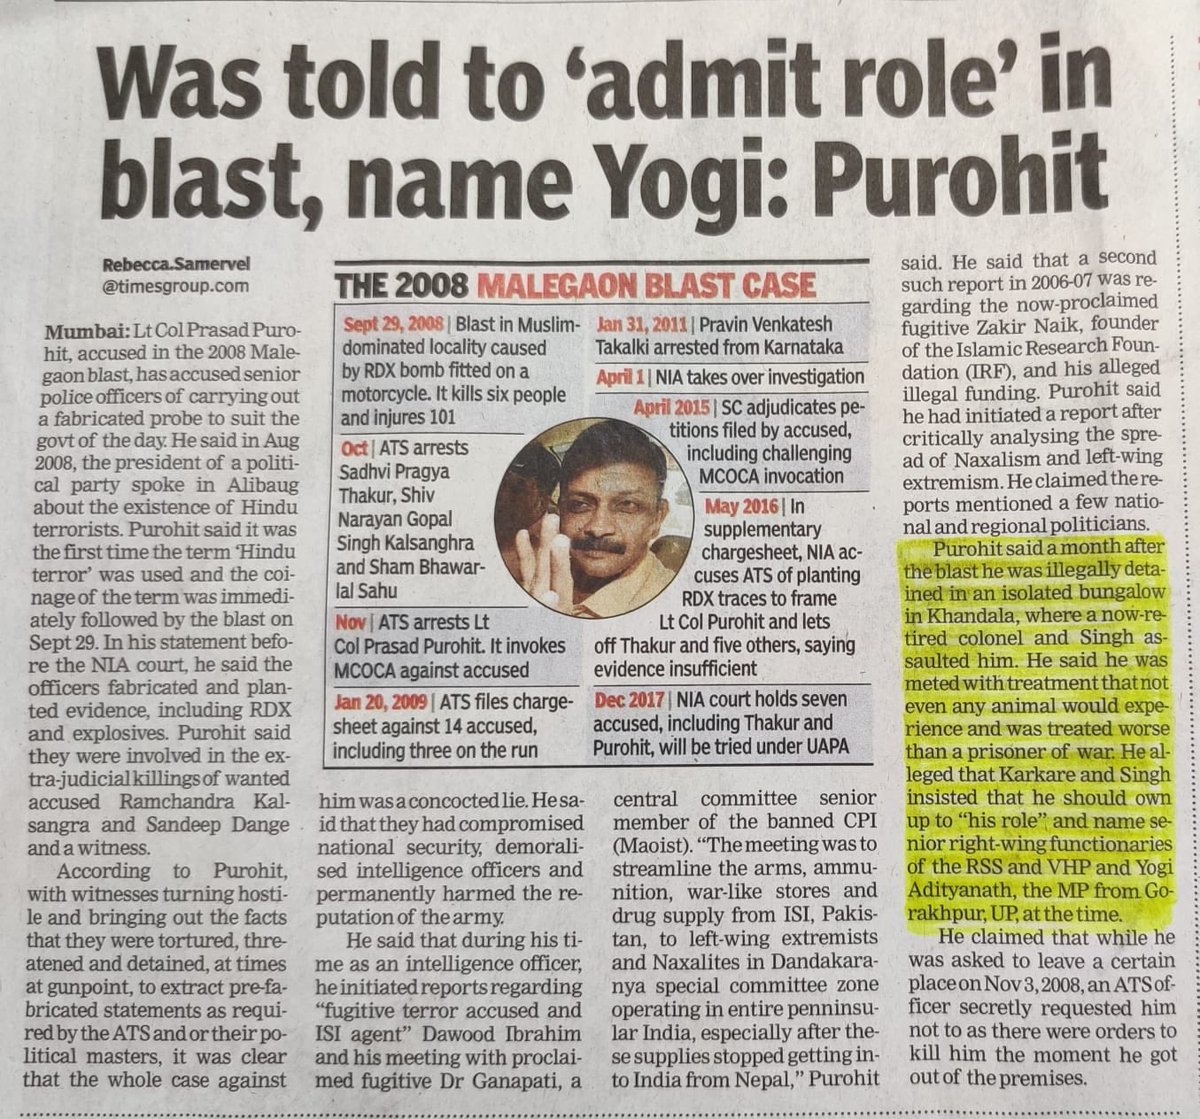 There was a lot more to #HemantKarkare than met the eye. In his statement before an #NIA court, #Malegaon blast accused Col Purohit slams Karkare & other ATS officers for fabricating evidence in 2008 to implicate “saffron terrorism” during UPA1.